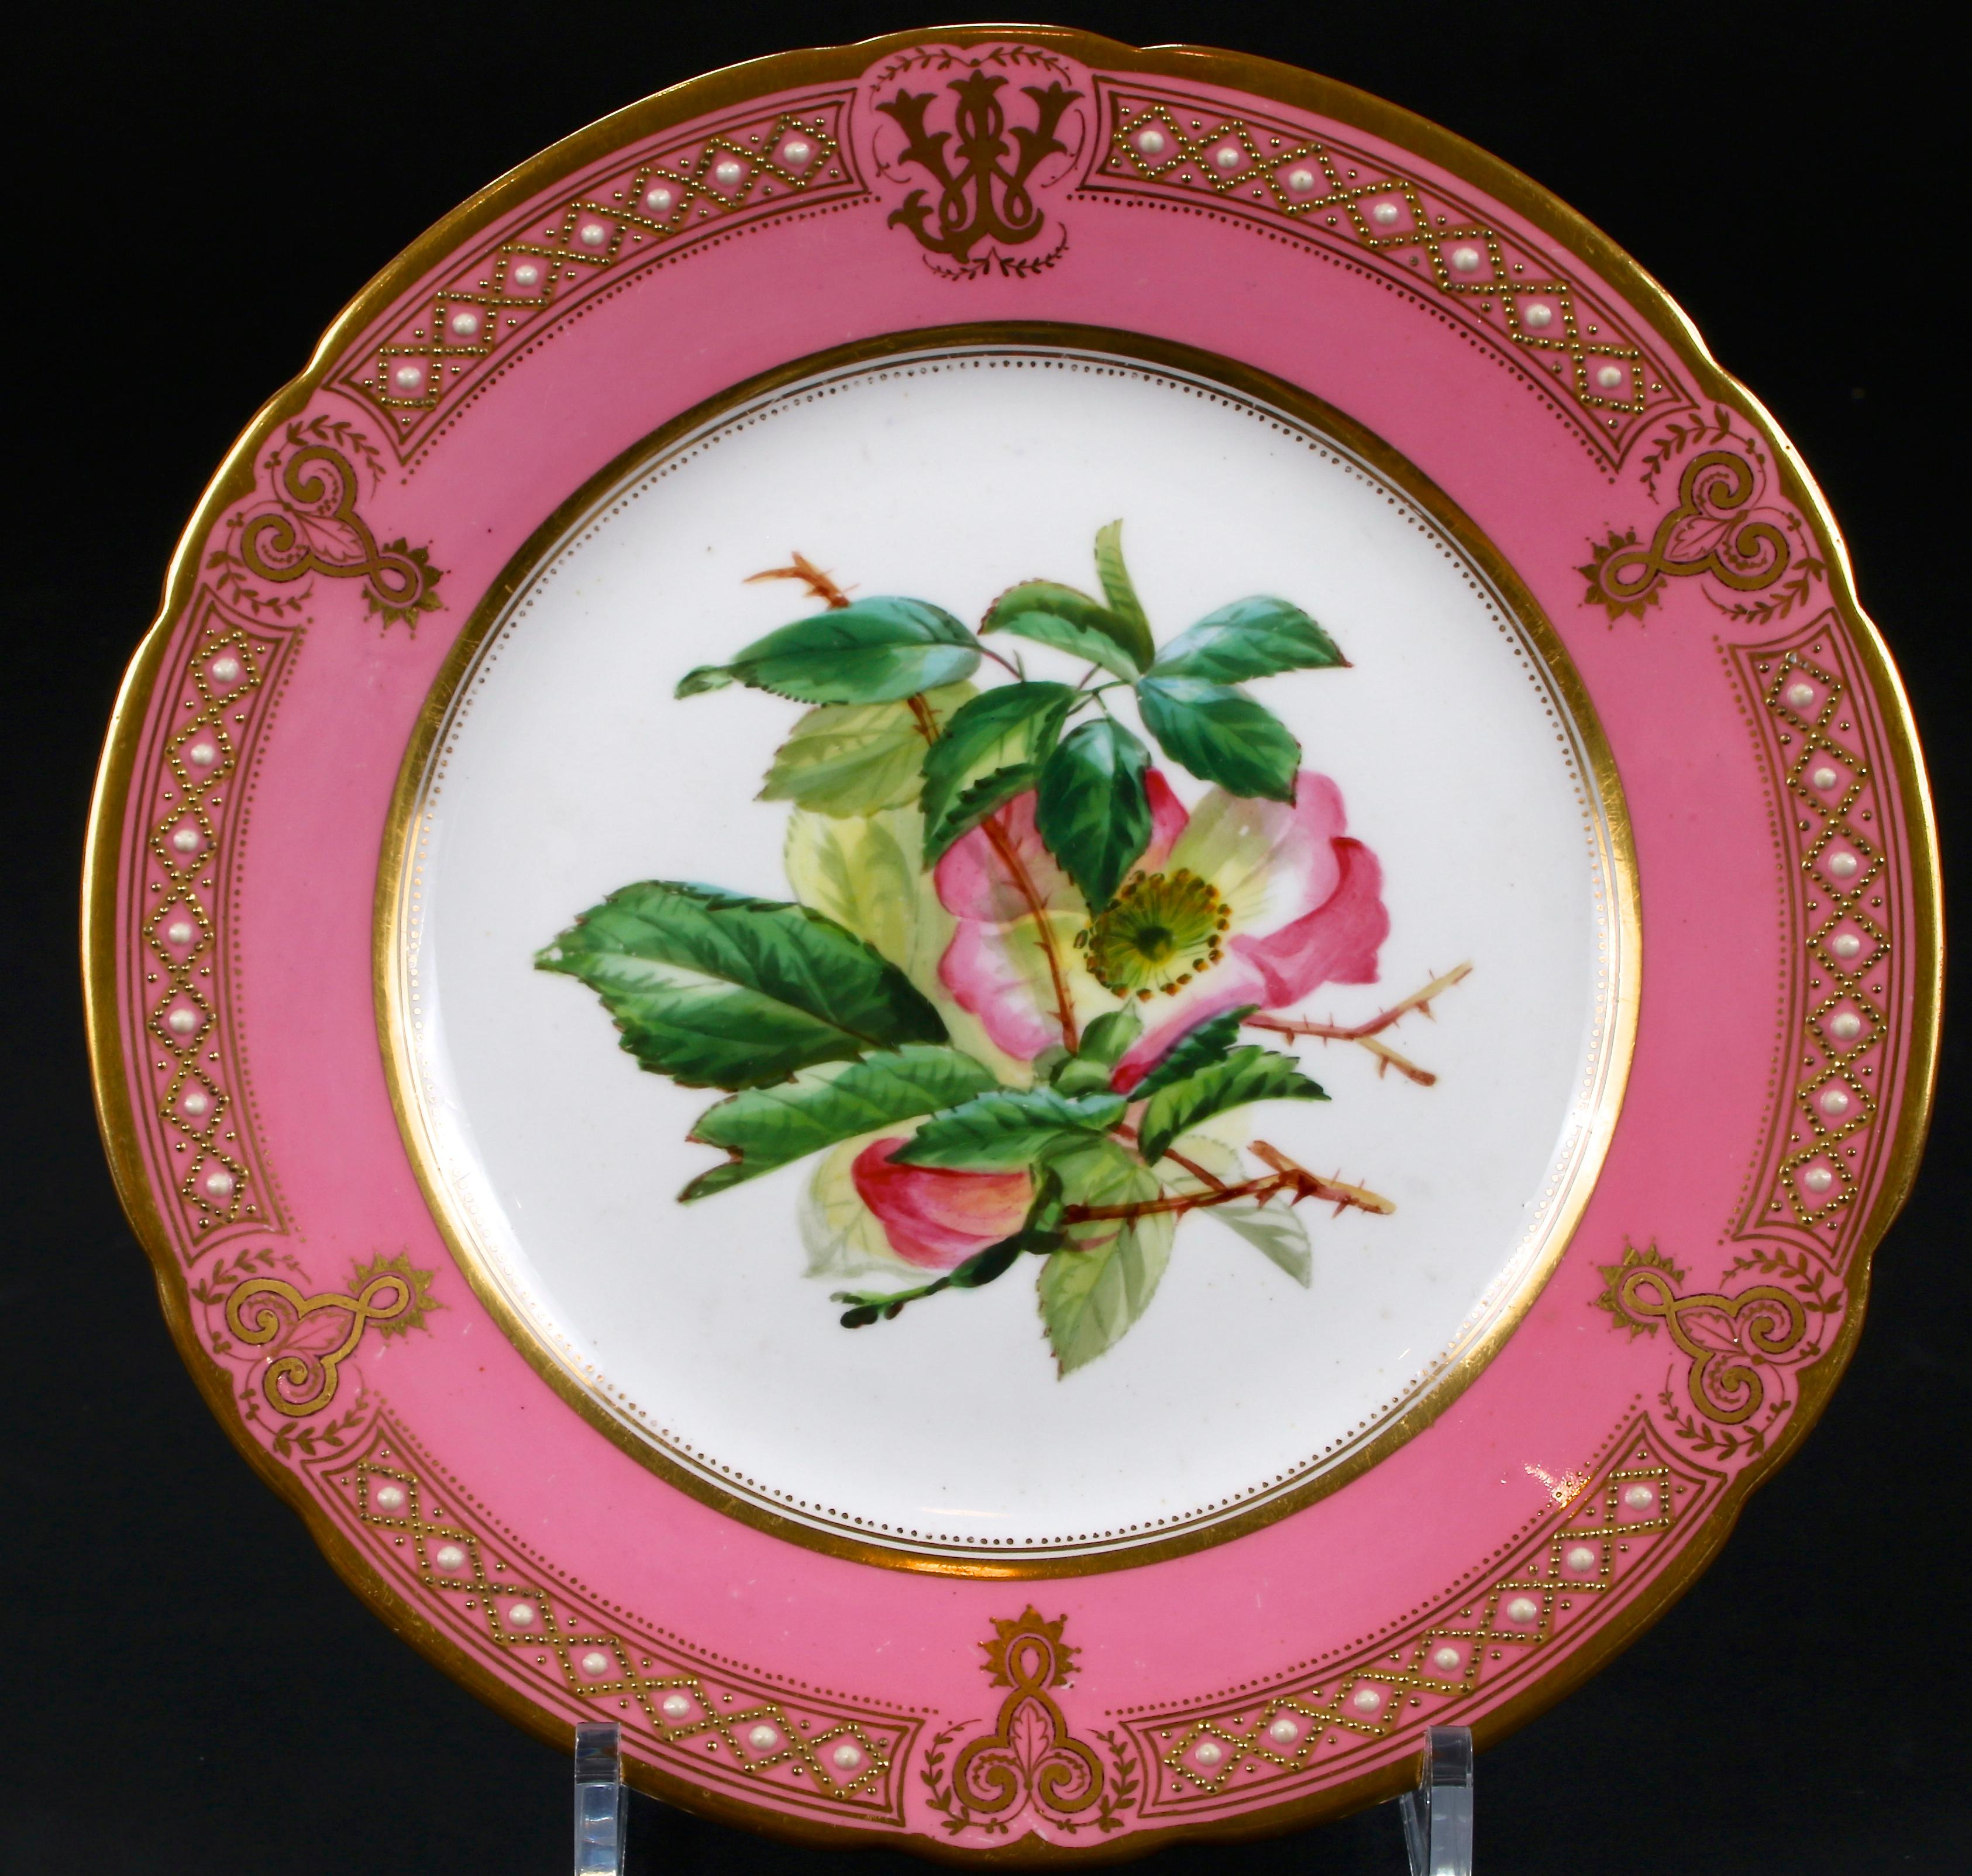 19th century hand painted, custom made pink, ‘Rose Pompadour’ dessert service from R.G. Scrivener & Co. England., 21 pieces total. No manufacturer's name but we would guess that this service was made by Davenport. Each piece has been skilfully hand